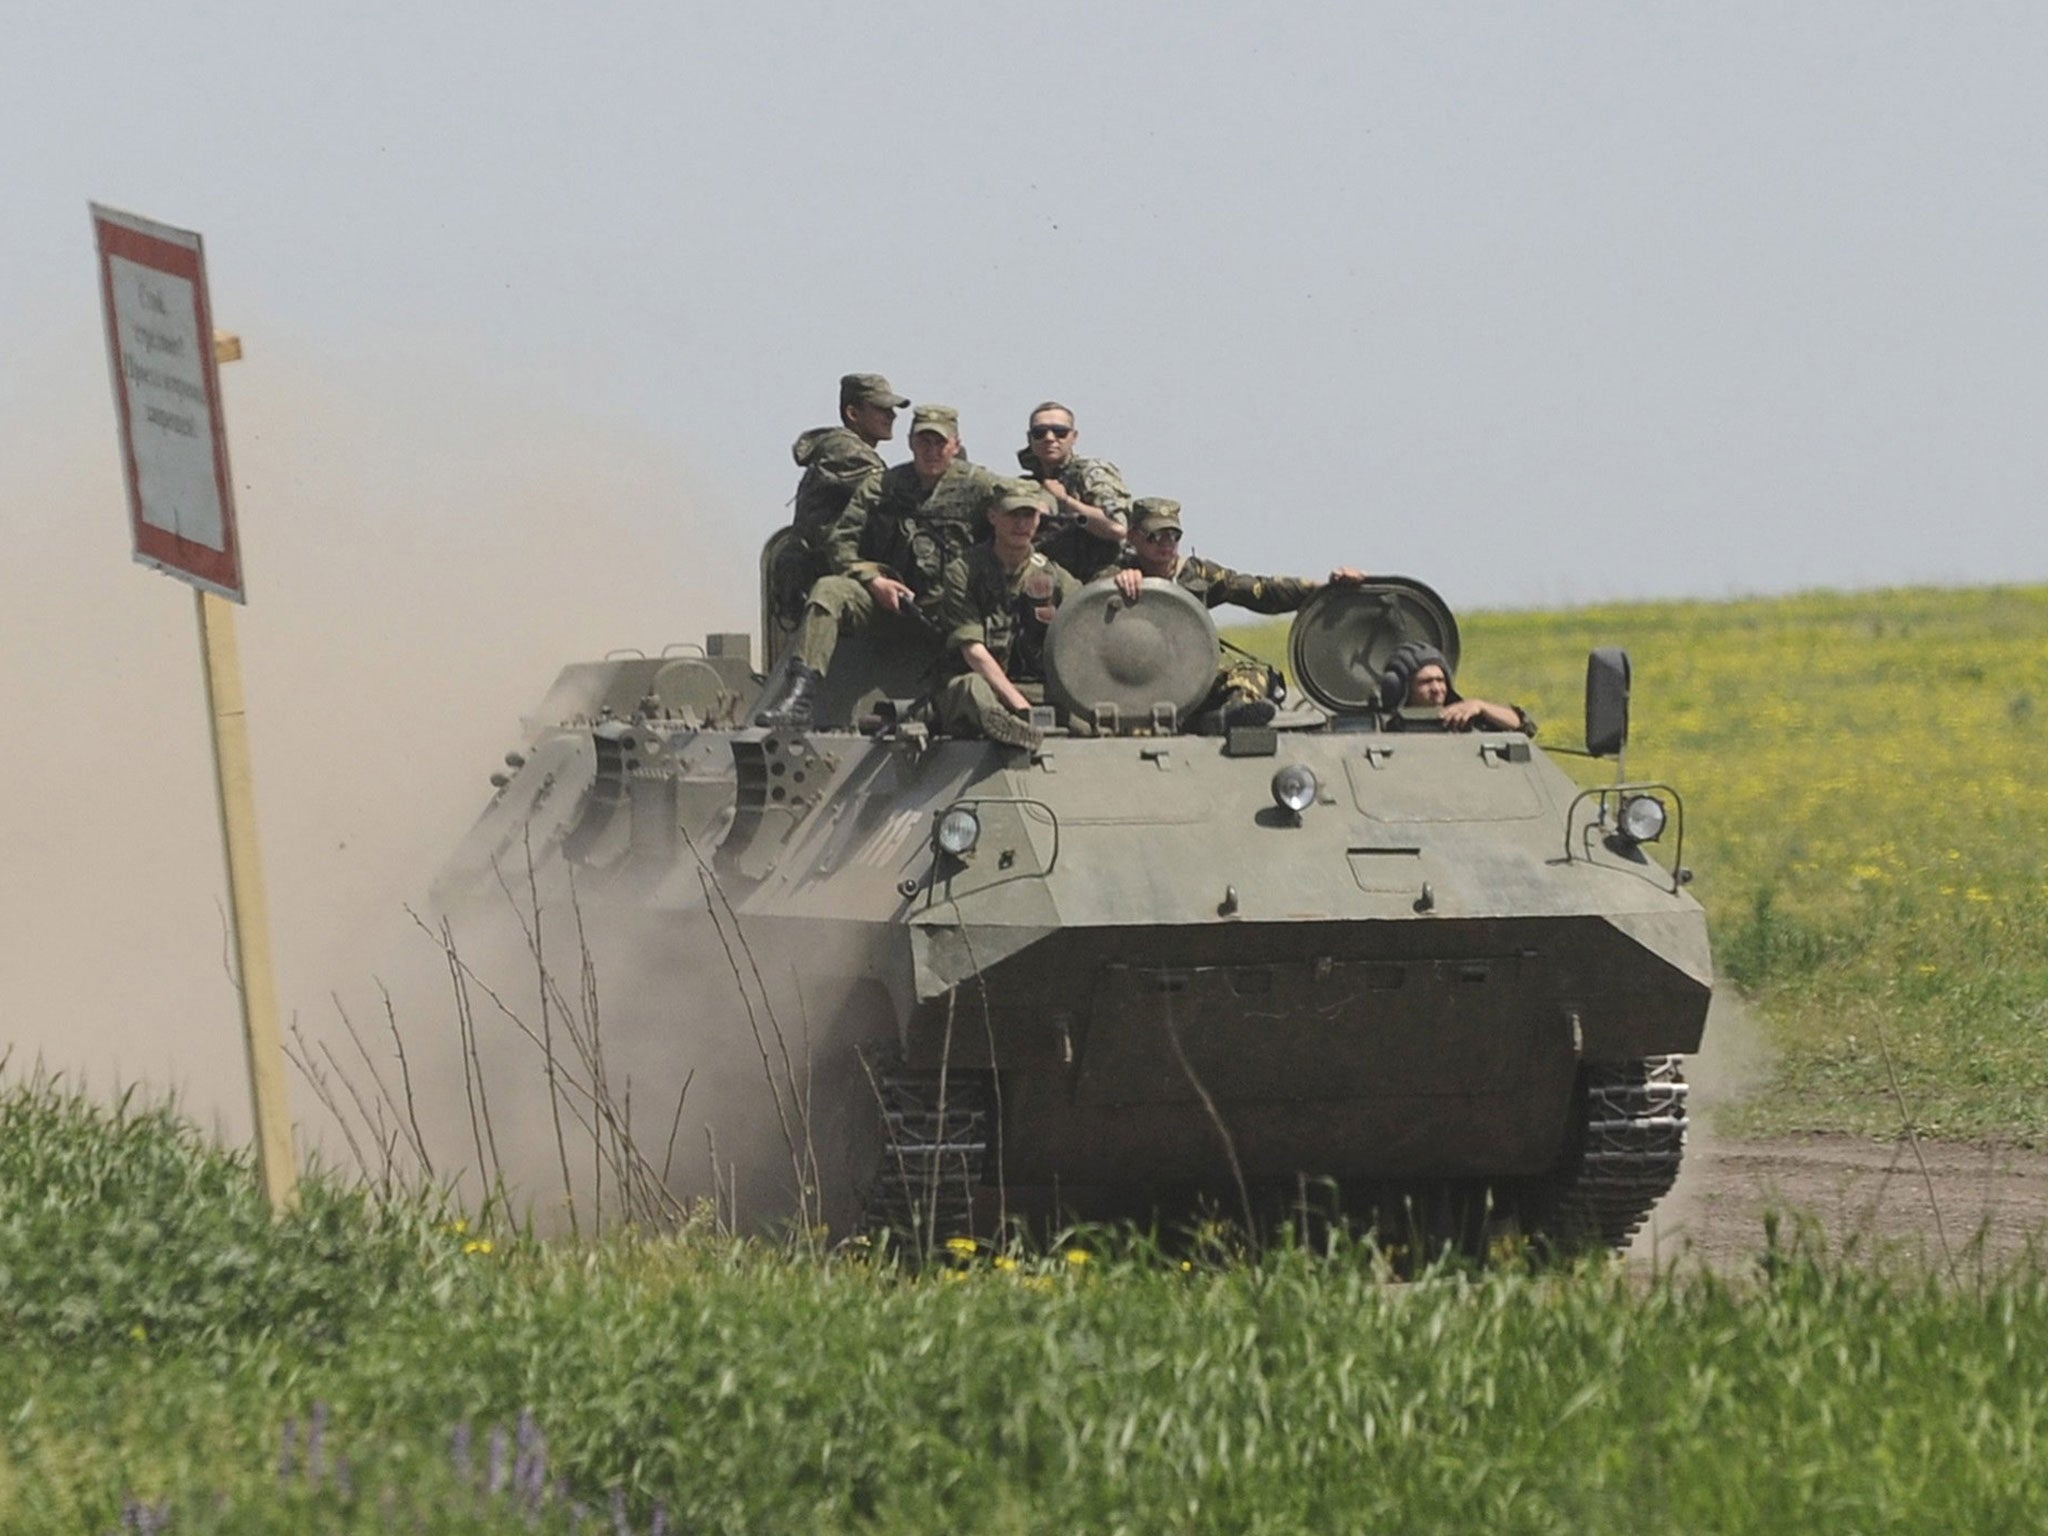 Tanks could be stationed outside of the Russian border in order to respond to attack quickly